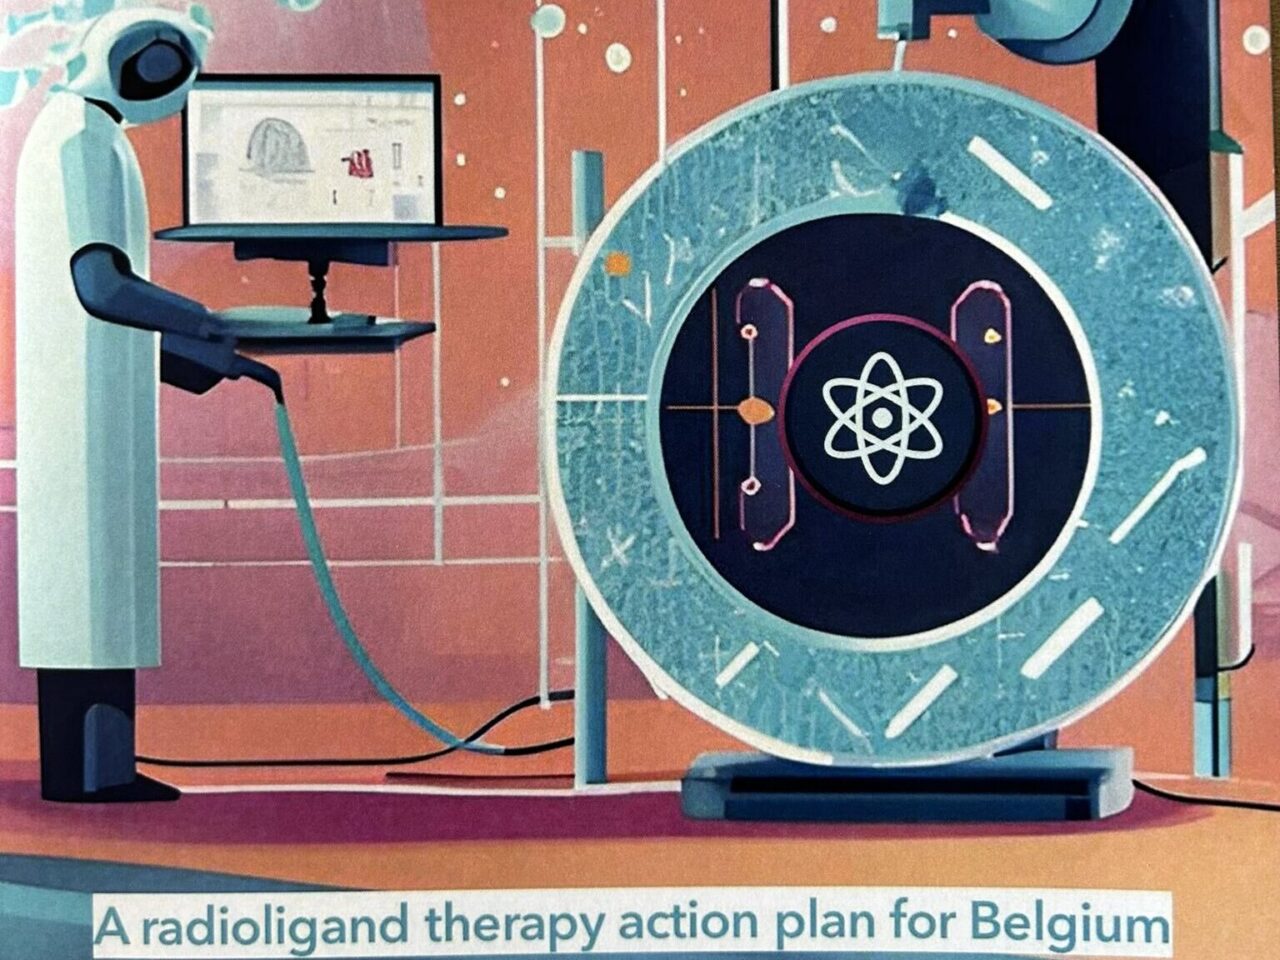 Christophe Deroose: Launch of the Belgian Radiology and therapy action plan